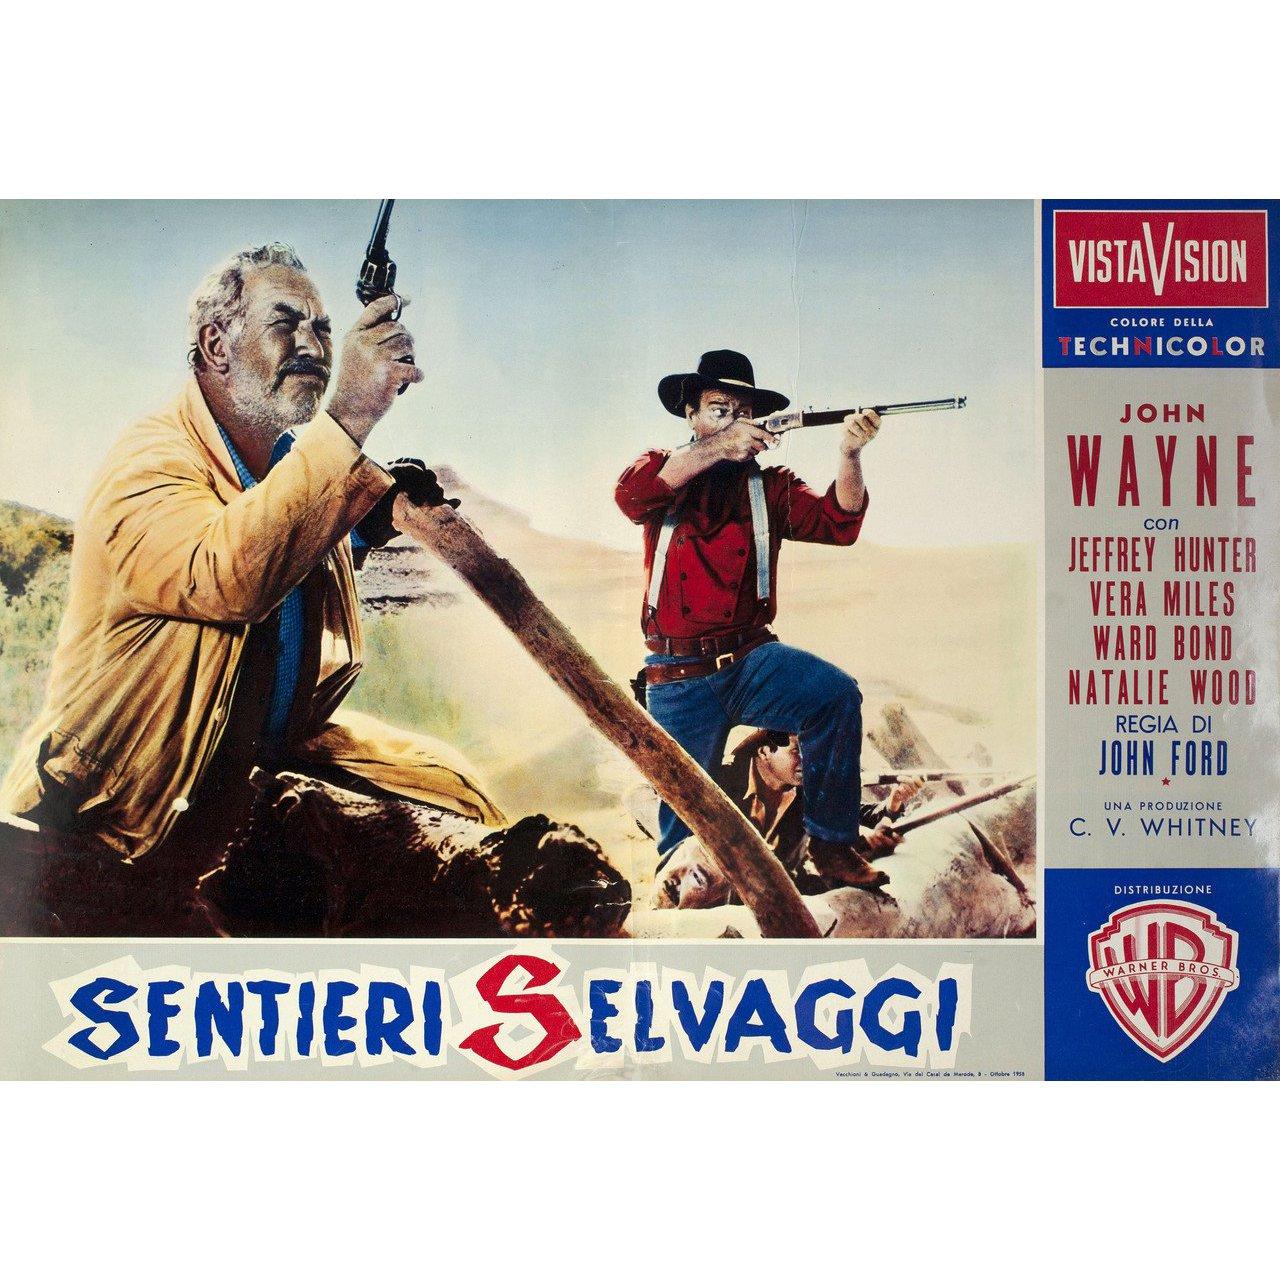 Original 1958 re-release Italian fotobusta poster for the film “The Searchers” directed by John Ford with John Wayne / Jeffrey Hunter / Vera Miles / Ward Bond. Very good-fine condition, folded. Many original posters were issued folded or were